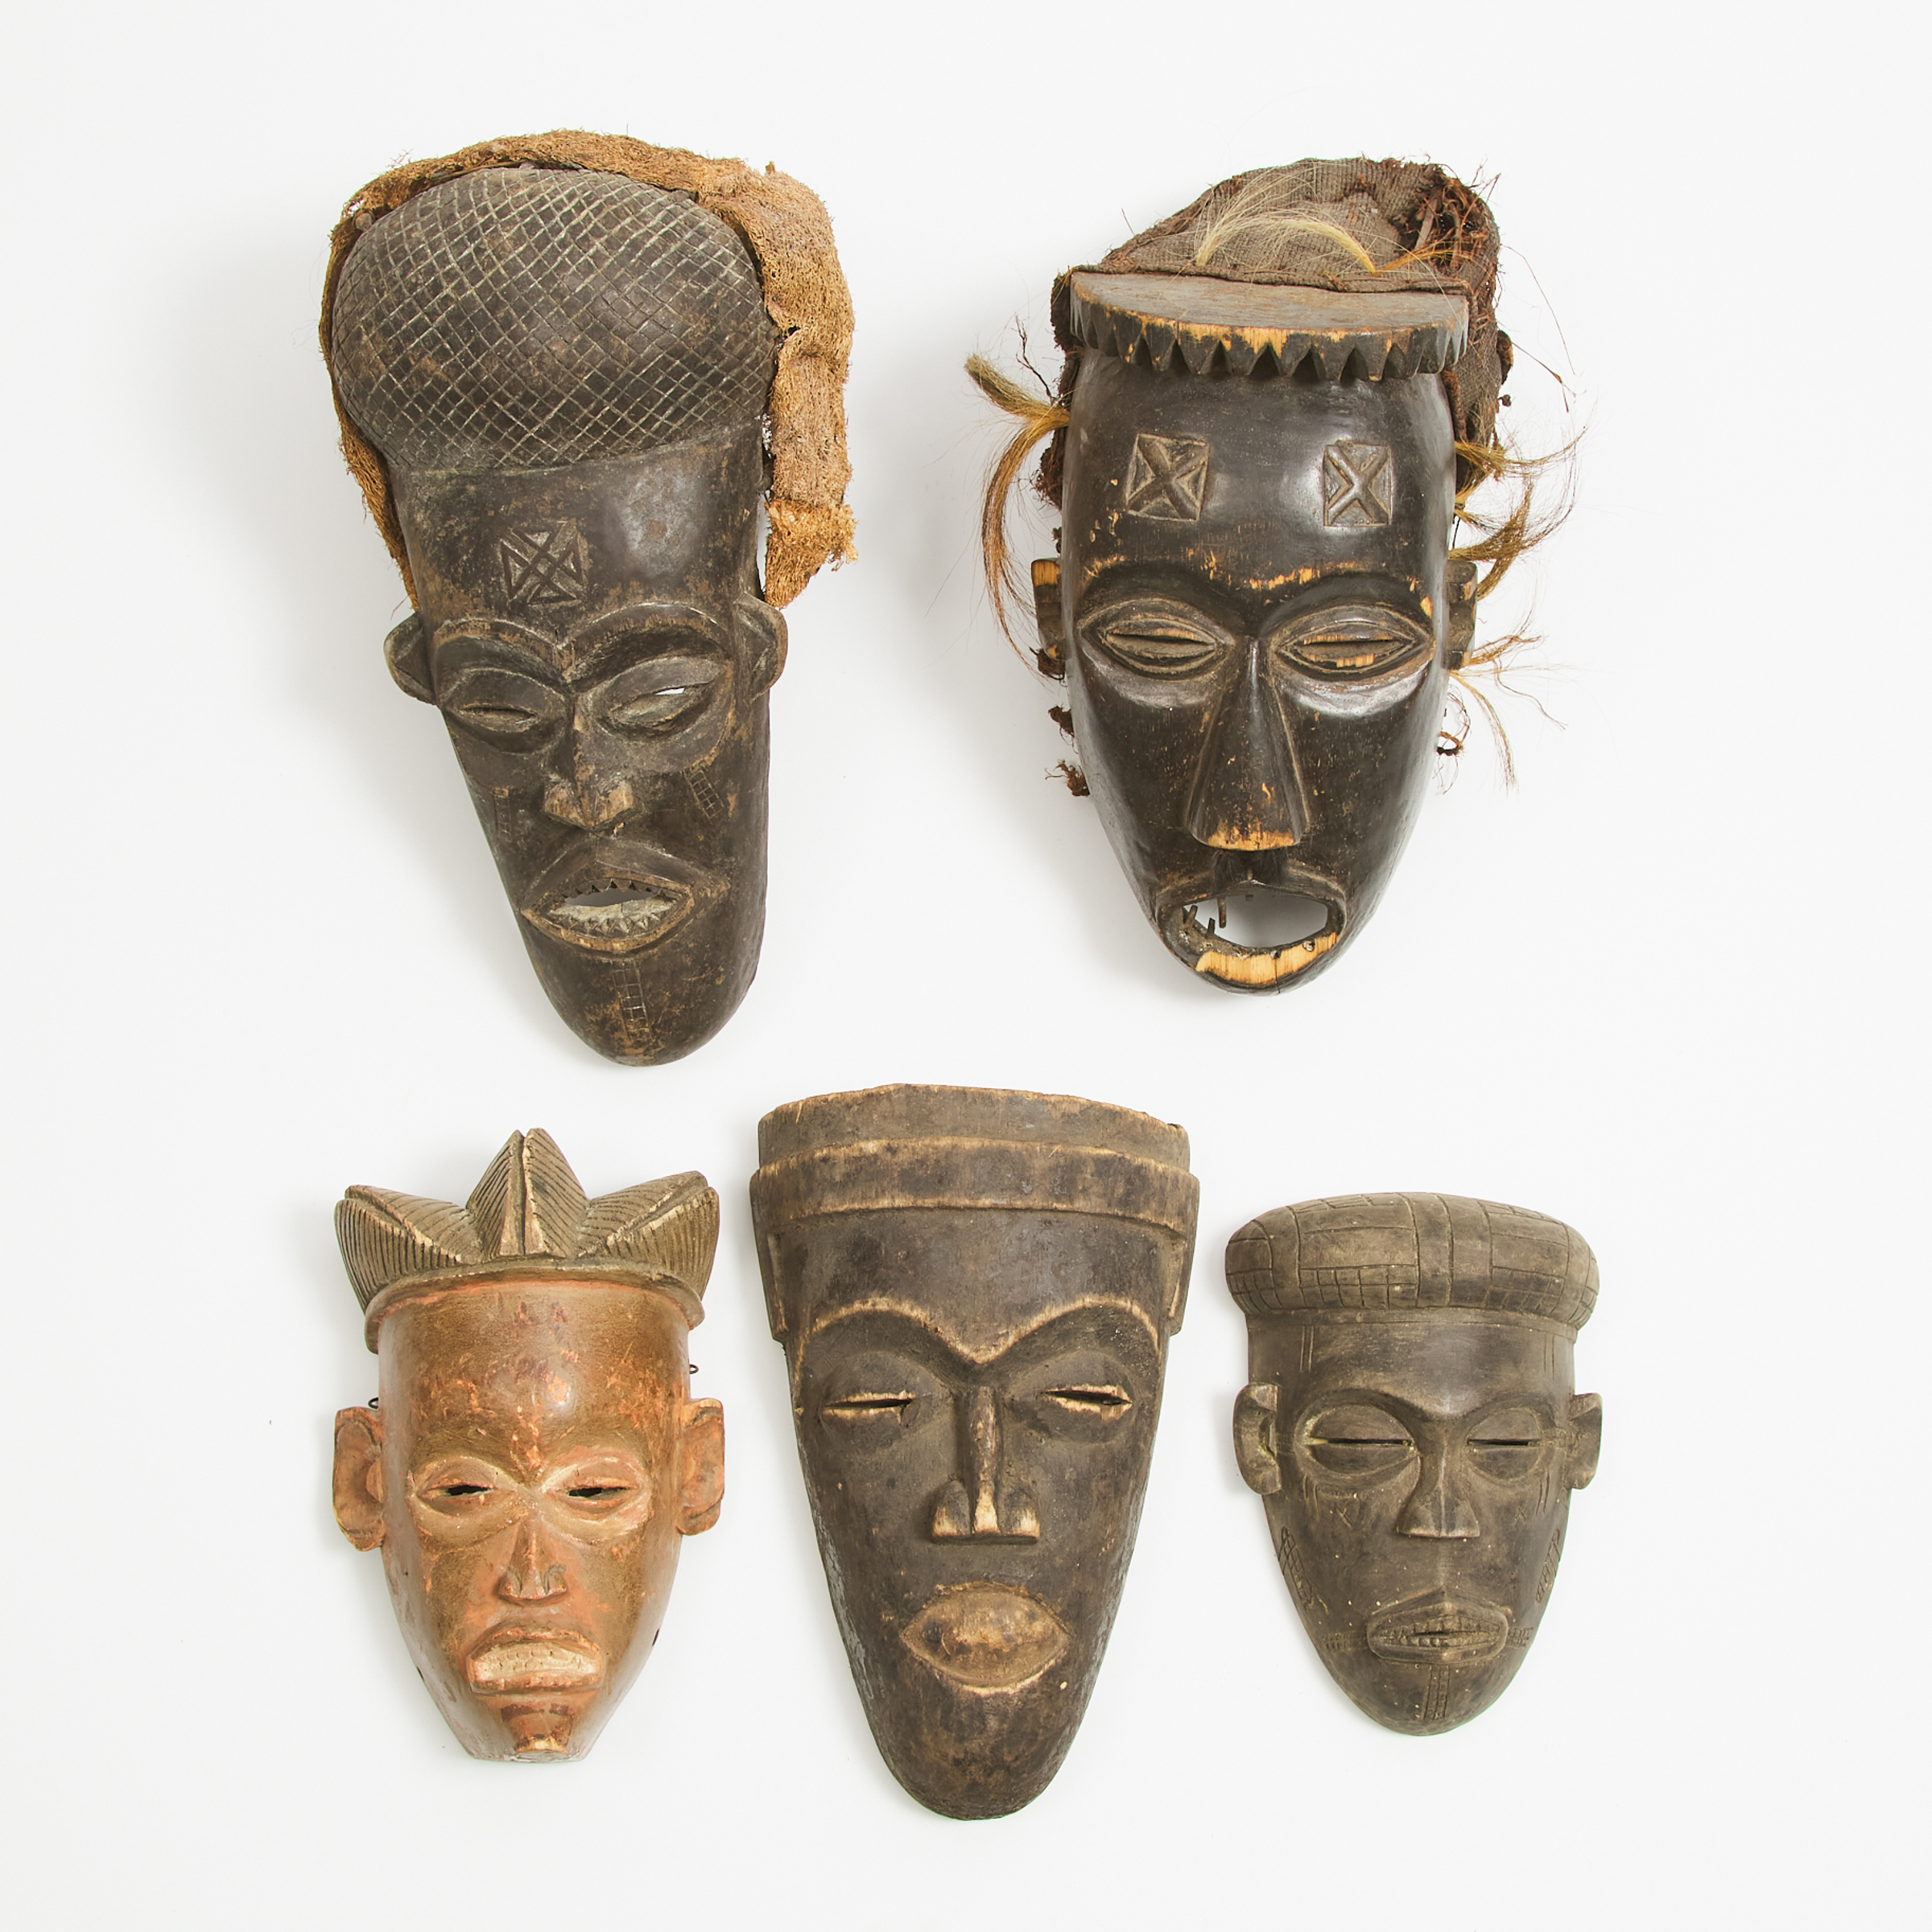 Five Chokwe Masks, two with Headdresses, Democratic Republic of Congo, Central Africa, 20th century